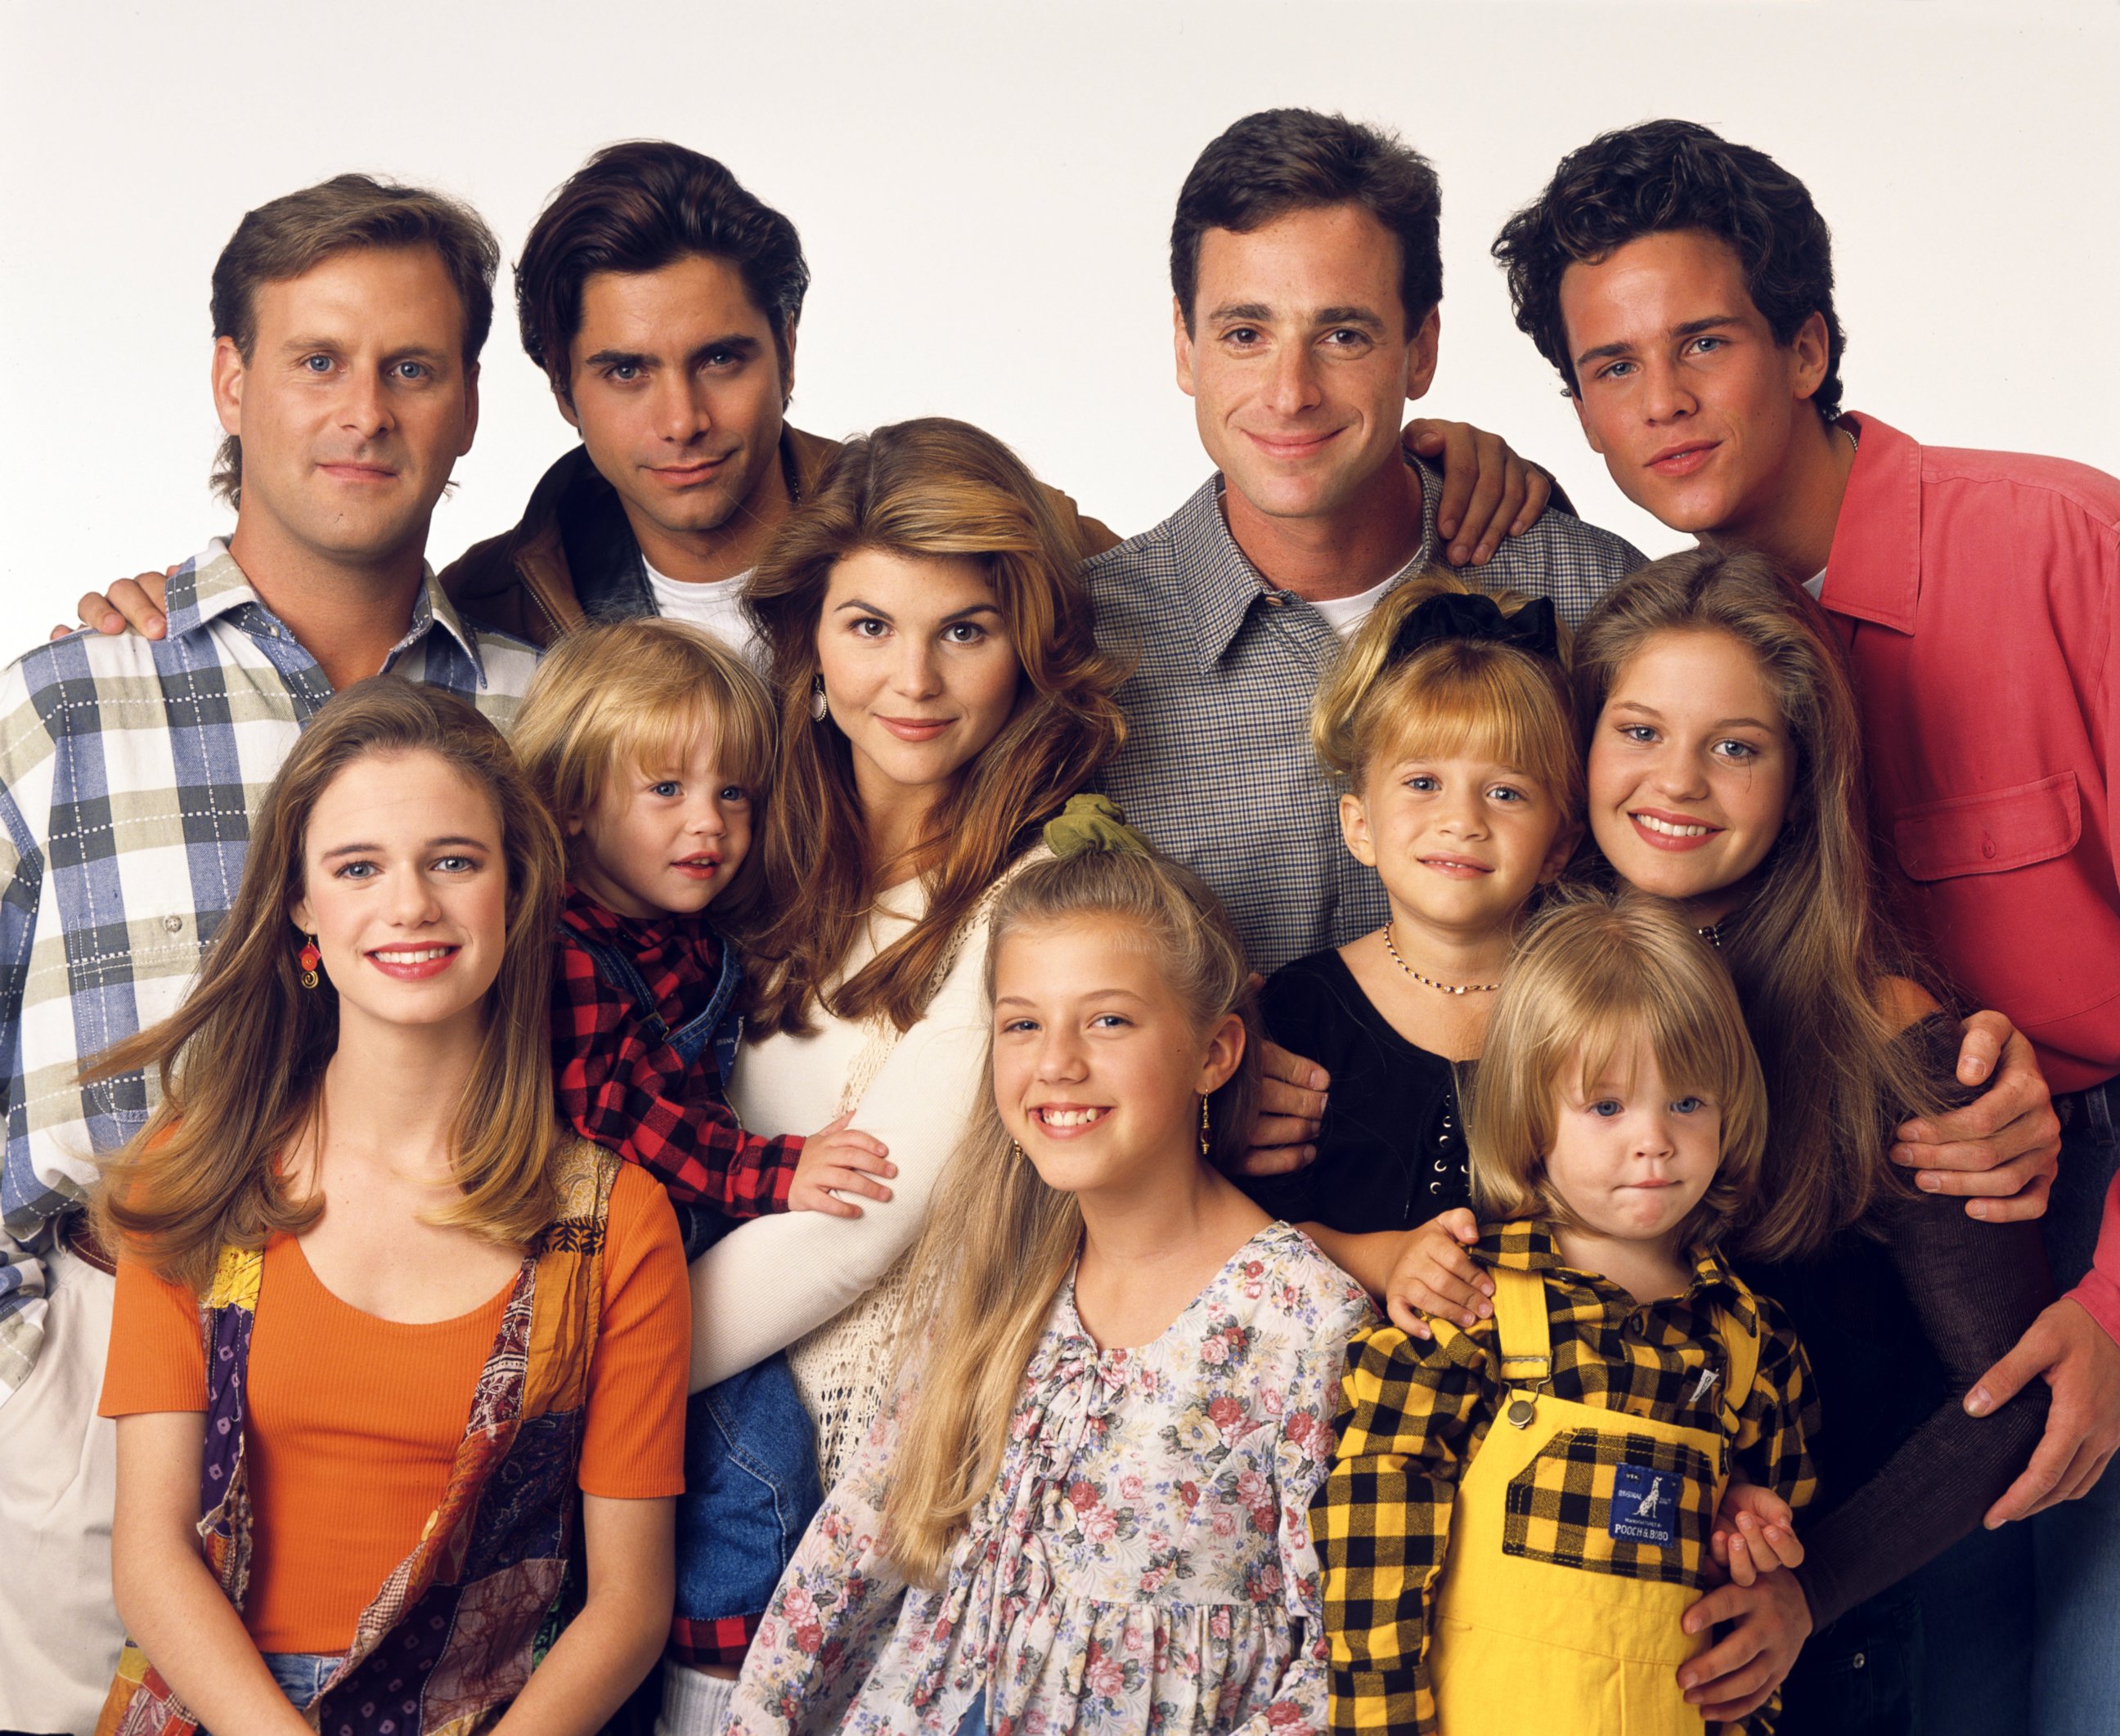 PHOTO: "Full House" aired from 1987 to 1995 on ABC.